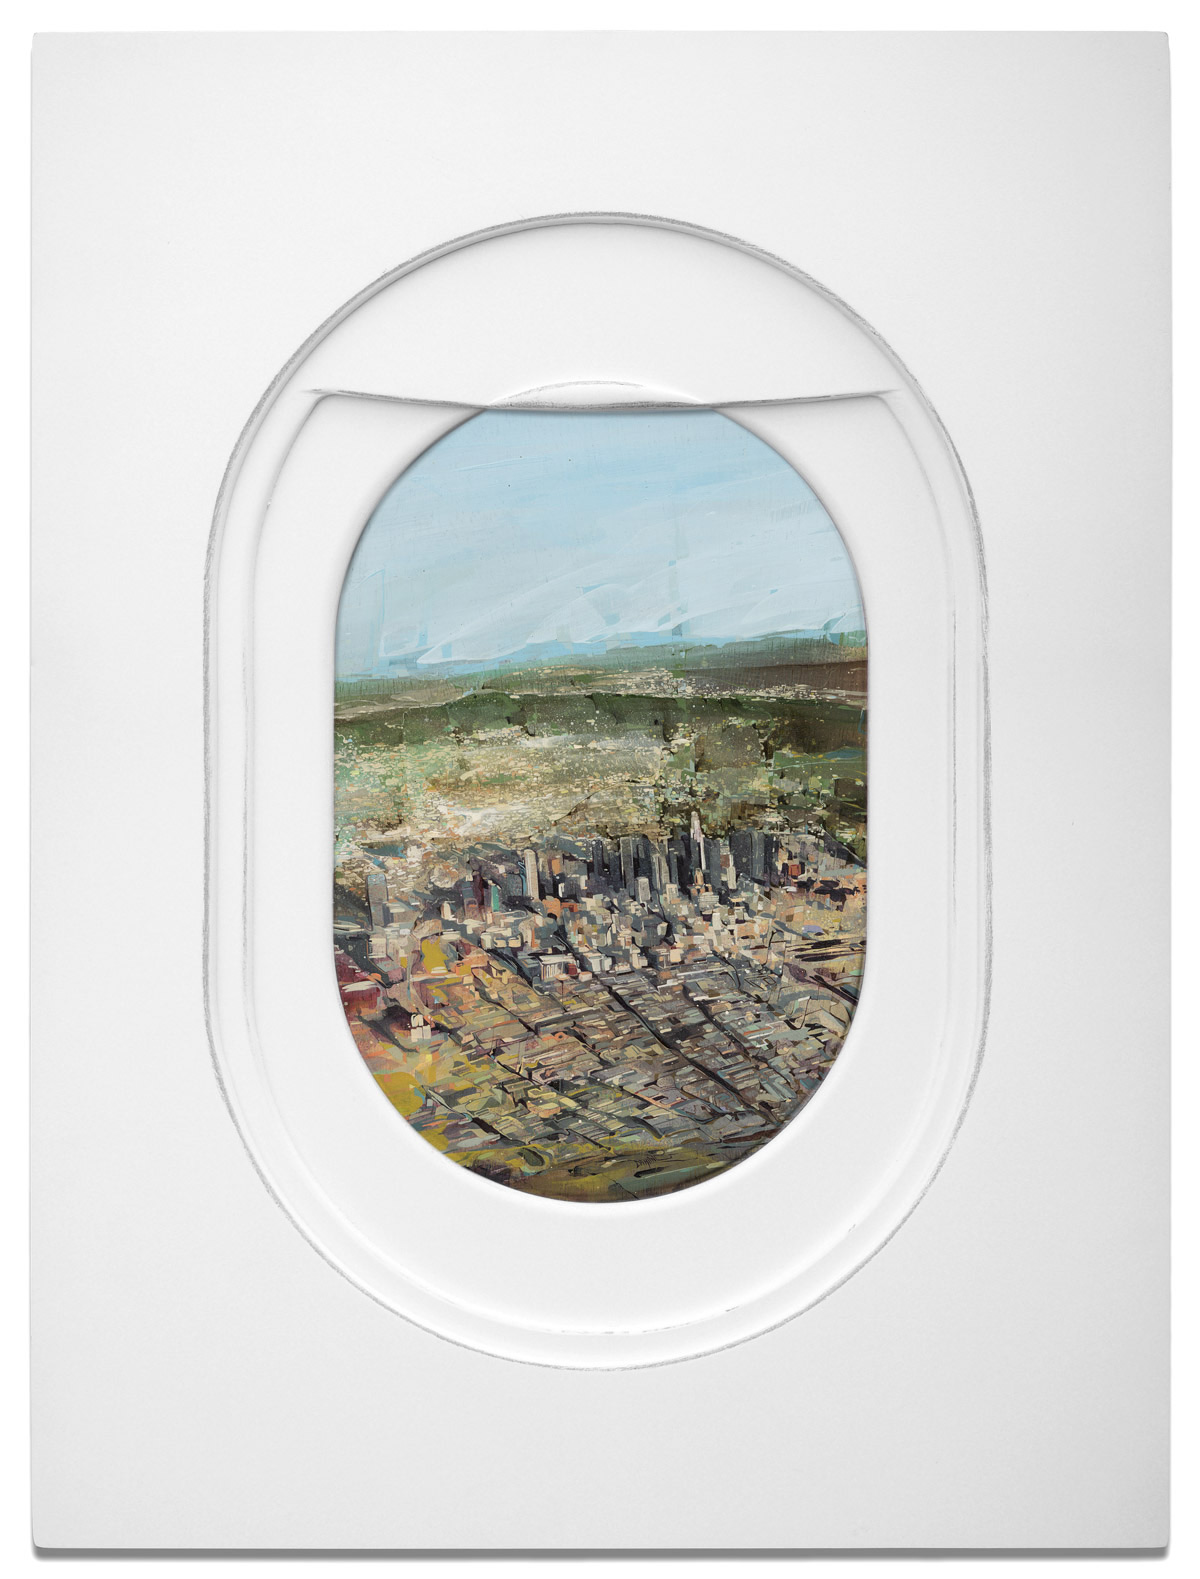 Peek Out of These Painted Airplane Windows to Spot Diverse Landscapes